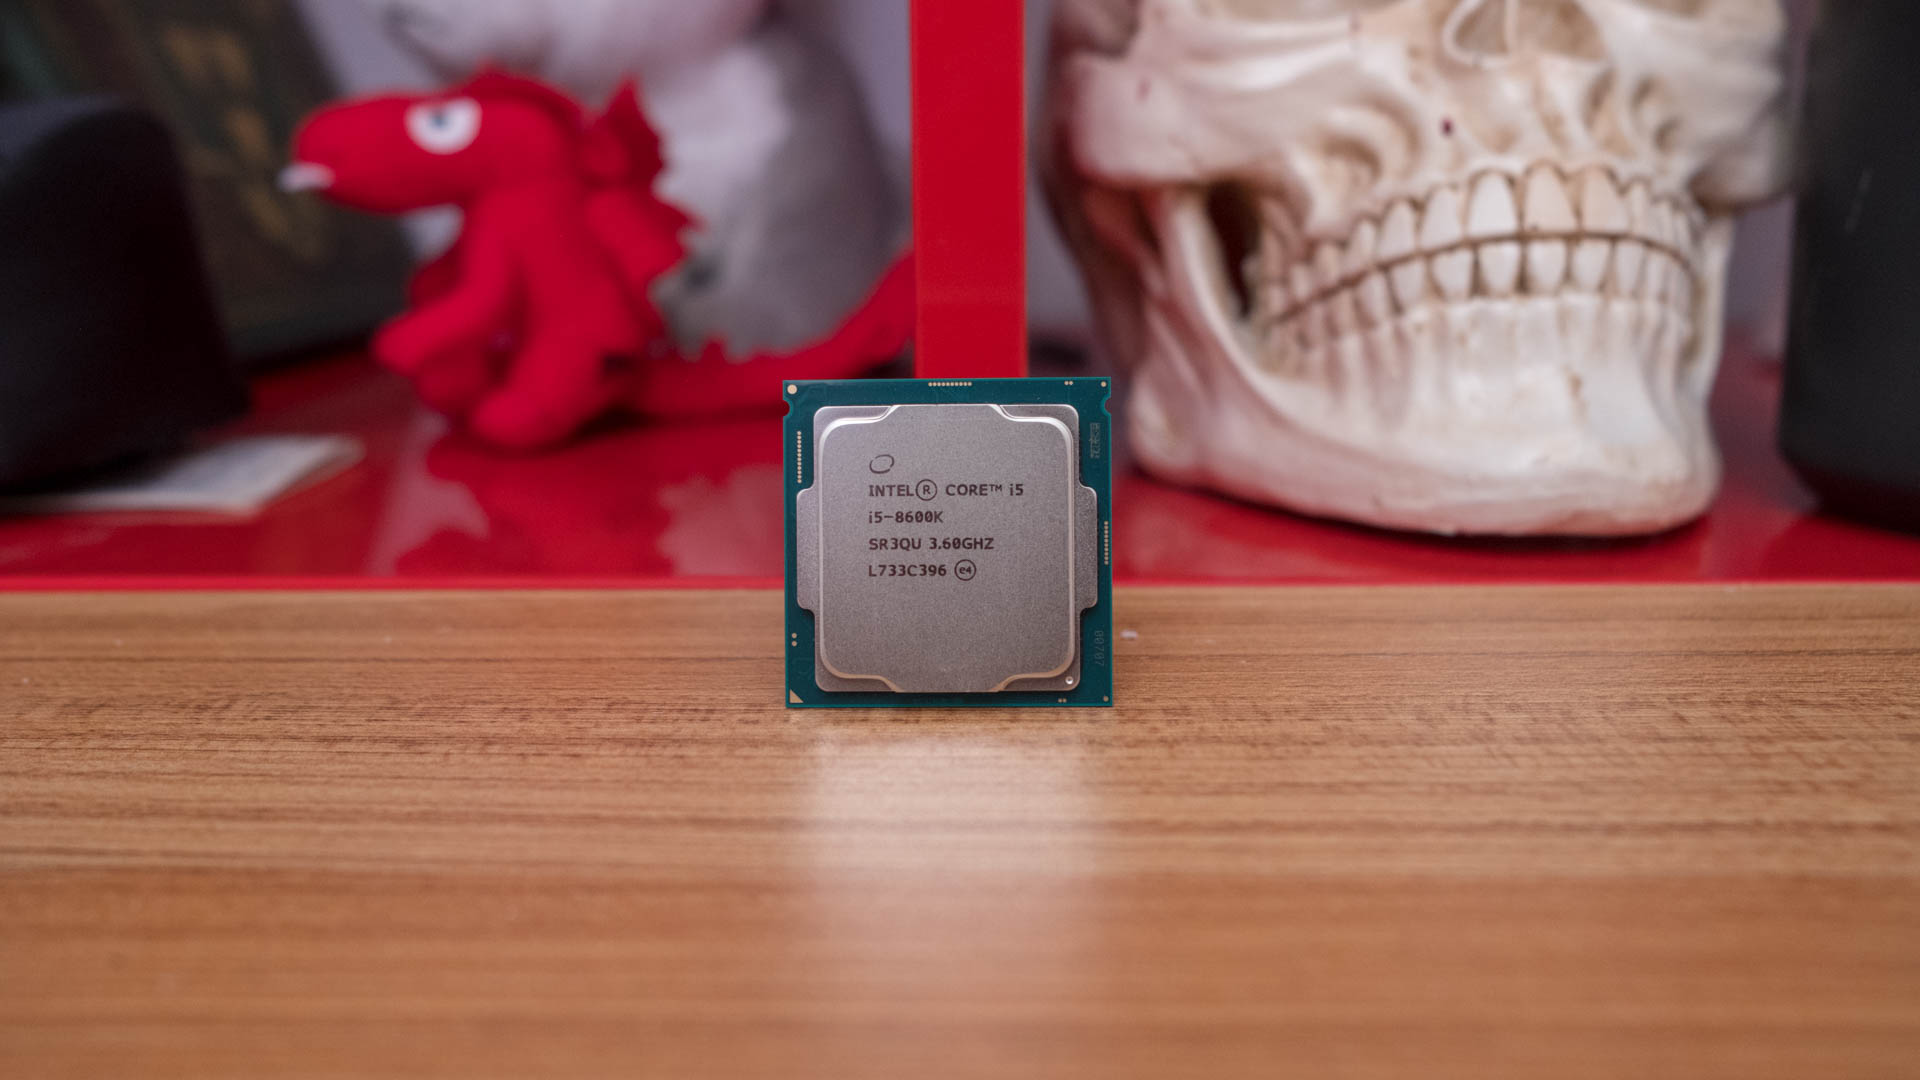 Latest Intel leak shows a photo of an Intel Core i5-10400 and